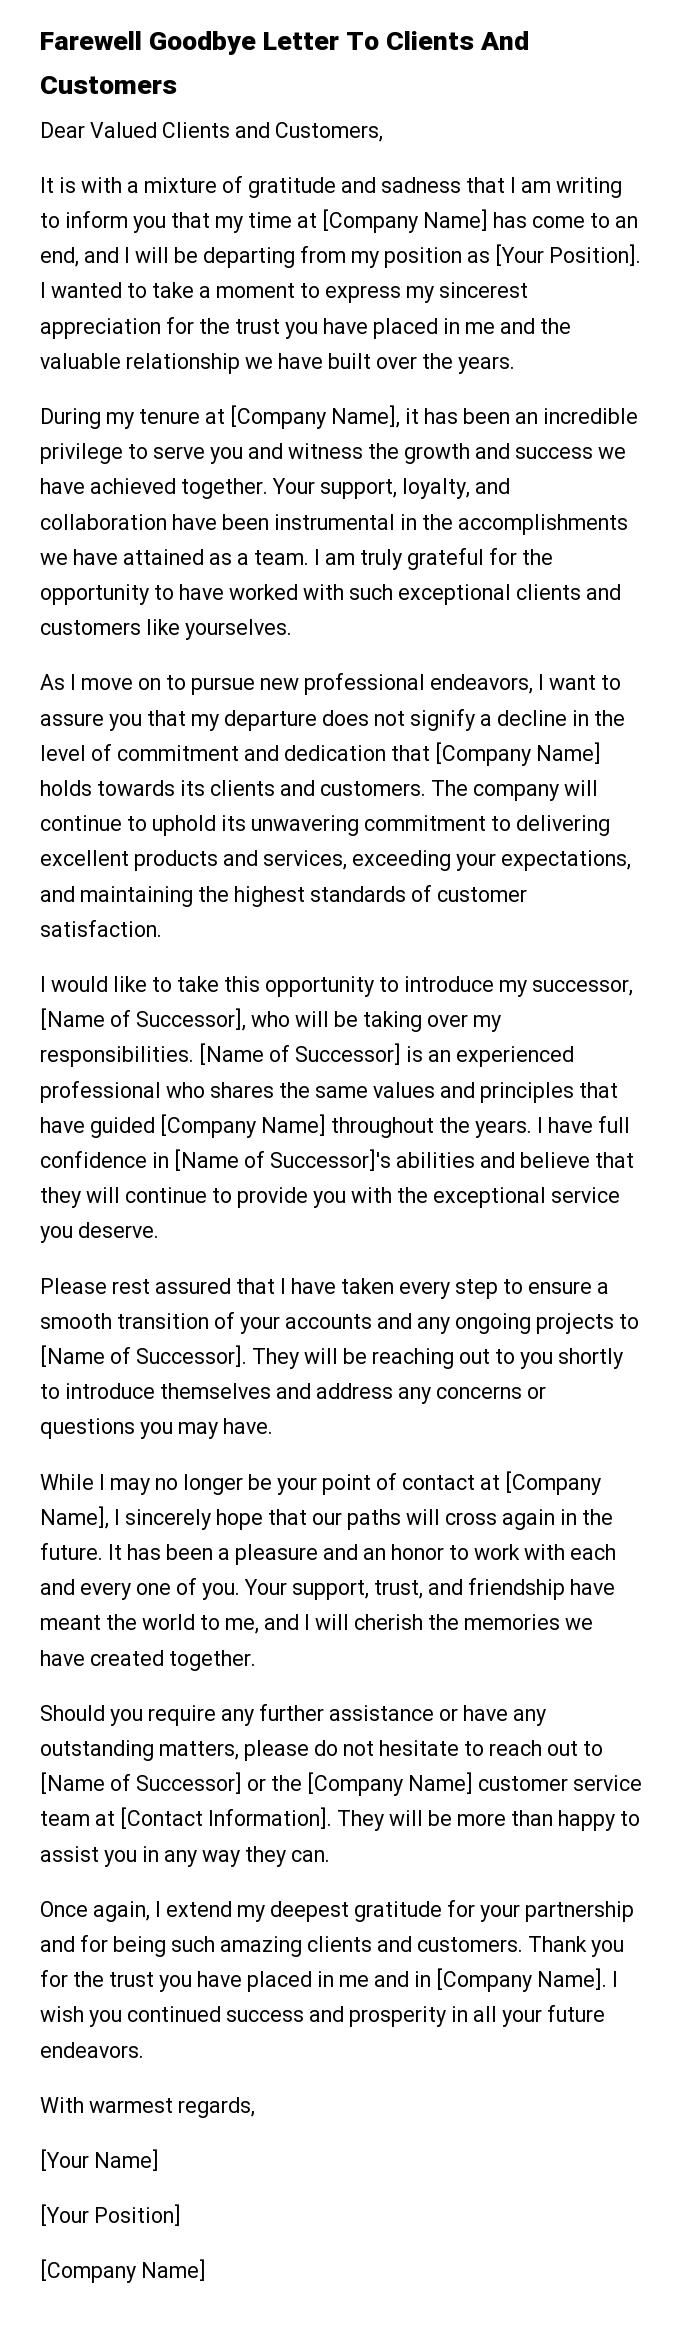 Farewell Goodbye Letter To Clients And Customers